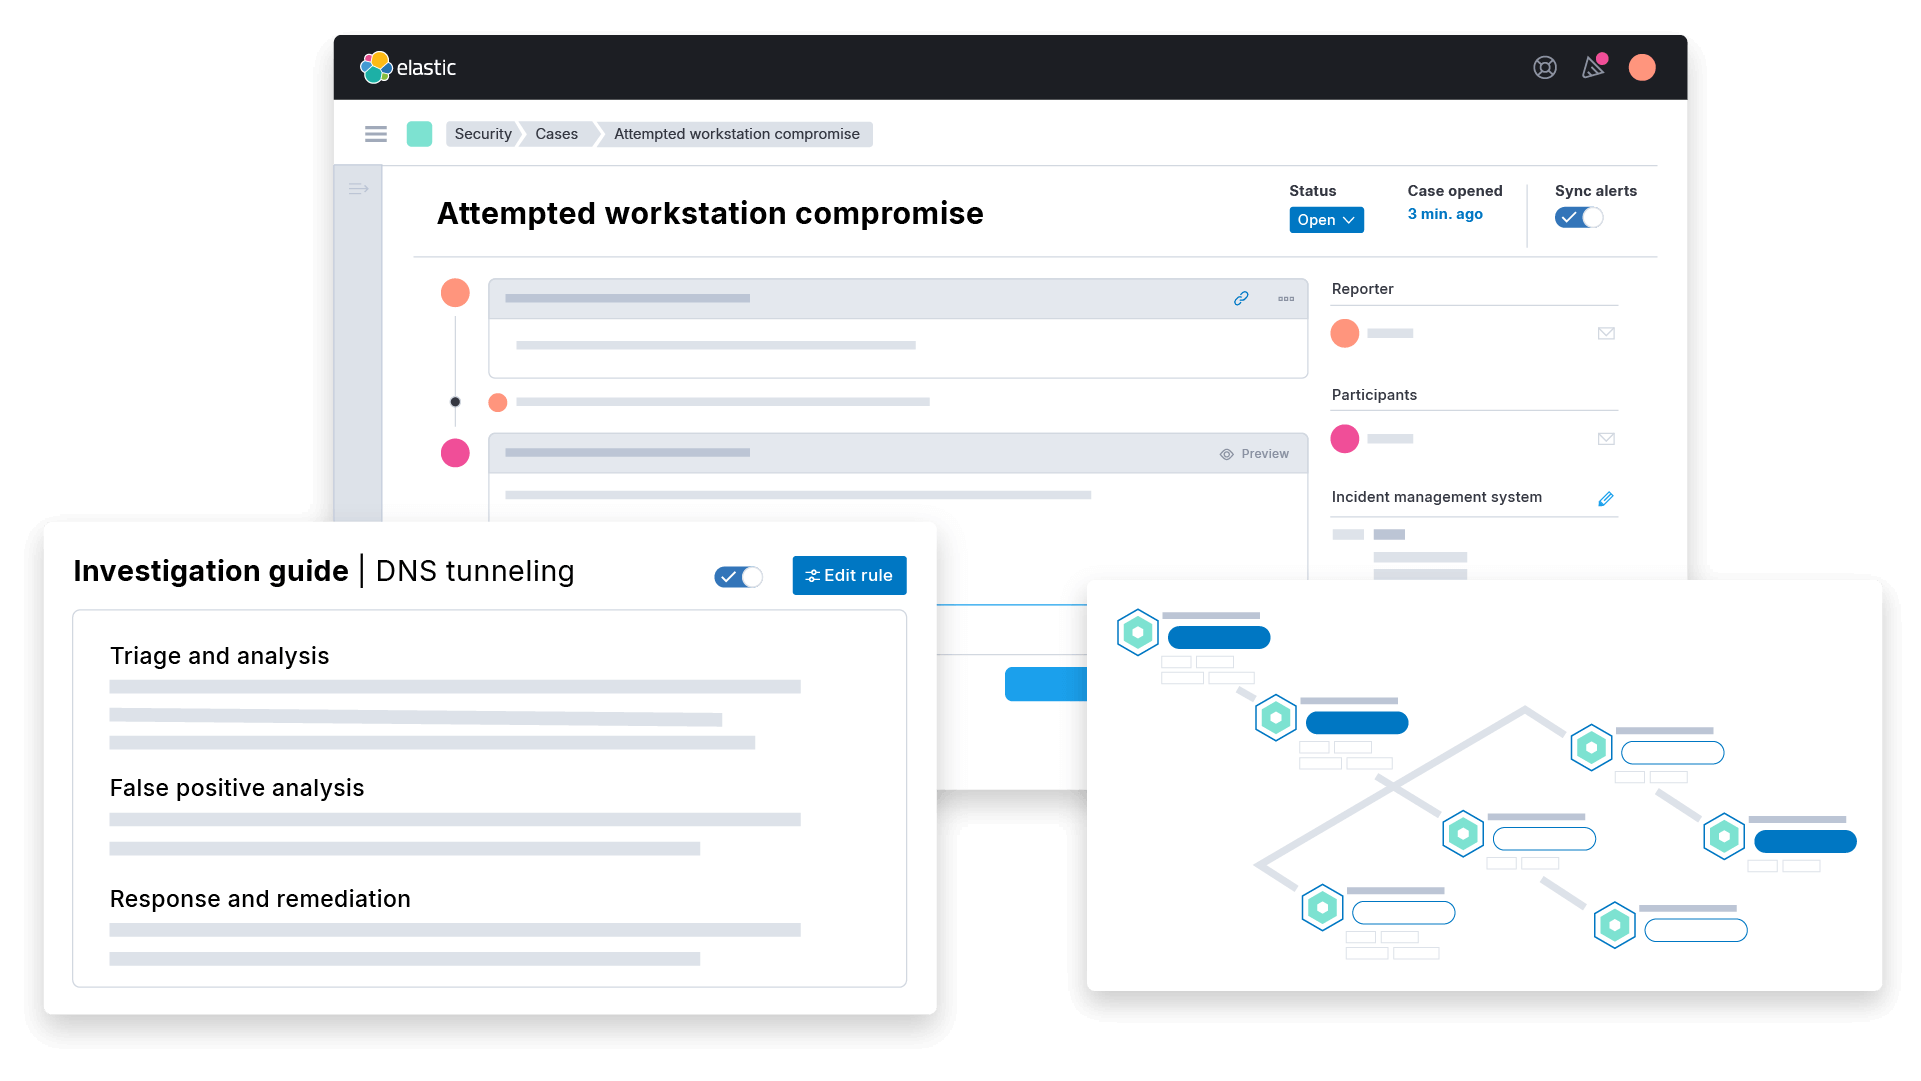 Elastic Security UI for investigating and responding to cyber attack, including case management, investigation guide, and analyzer view